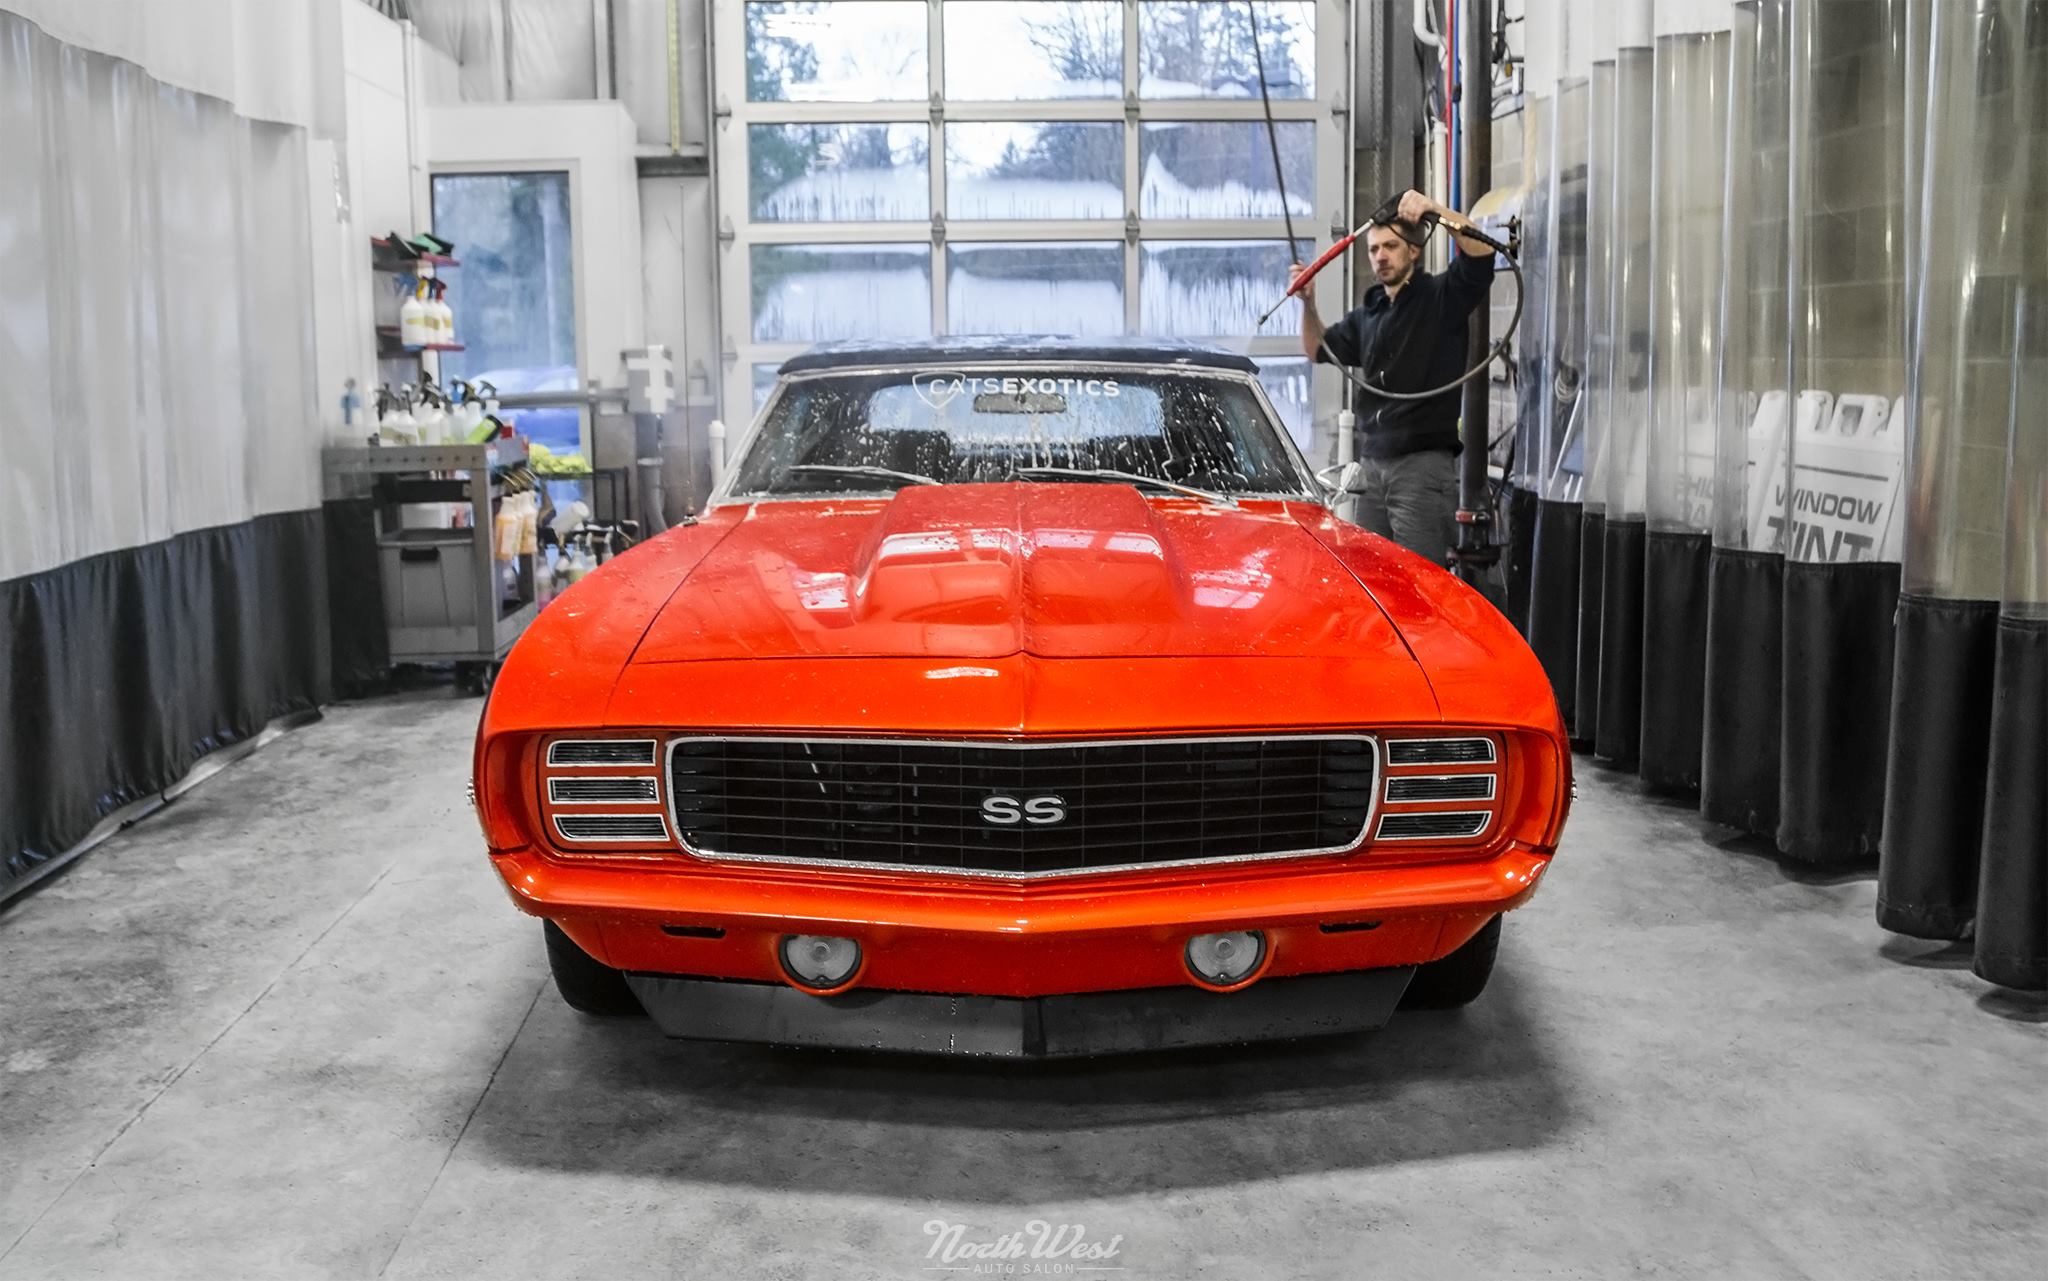 NWAS Daily Updates: Chevy Camaro SS gets Hand Washed ... - 2048 x 1281 jpeg 300kB